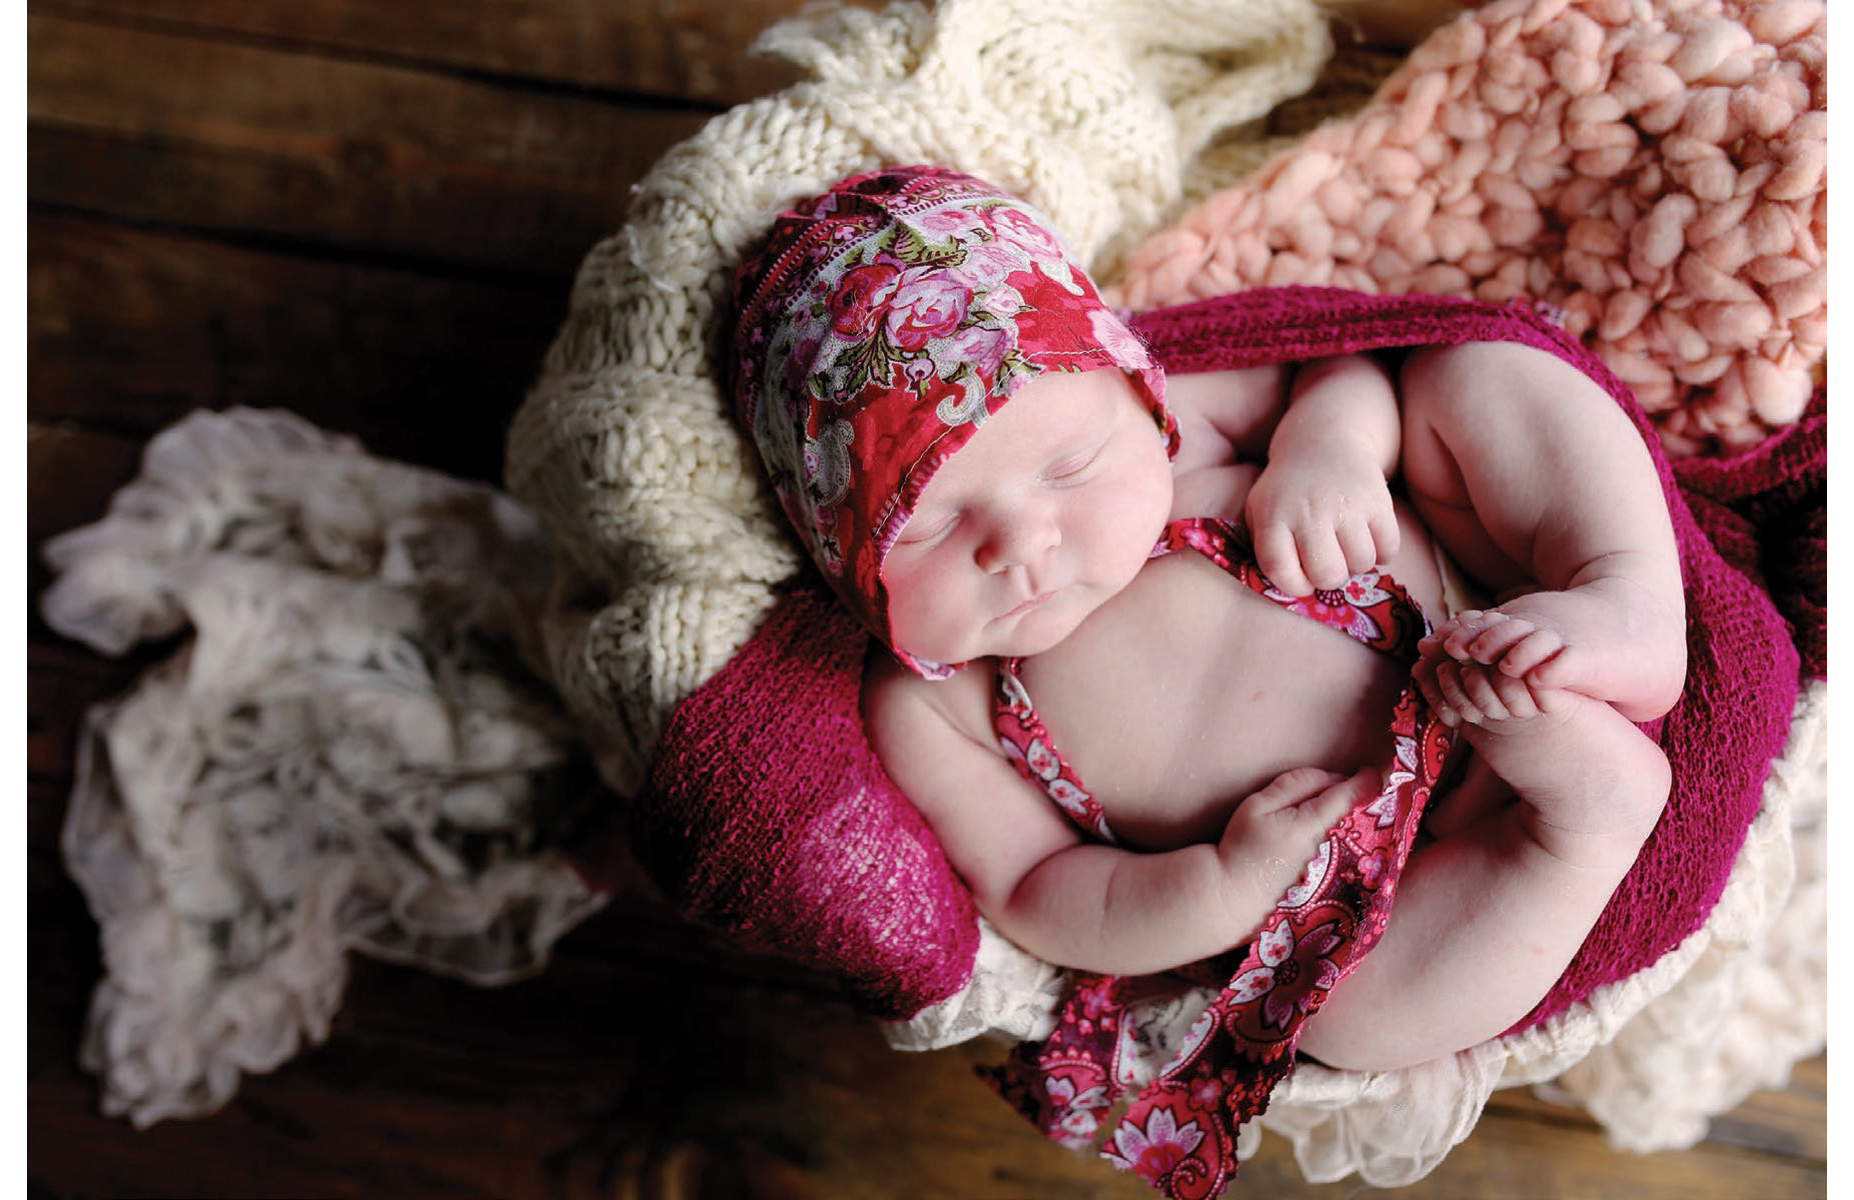 Cute Babies Images by Top Photographers for People Who Love Babies - photo 4